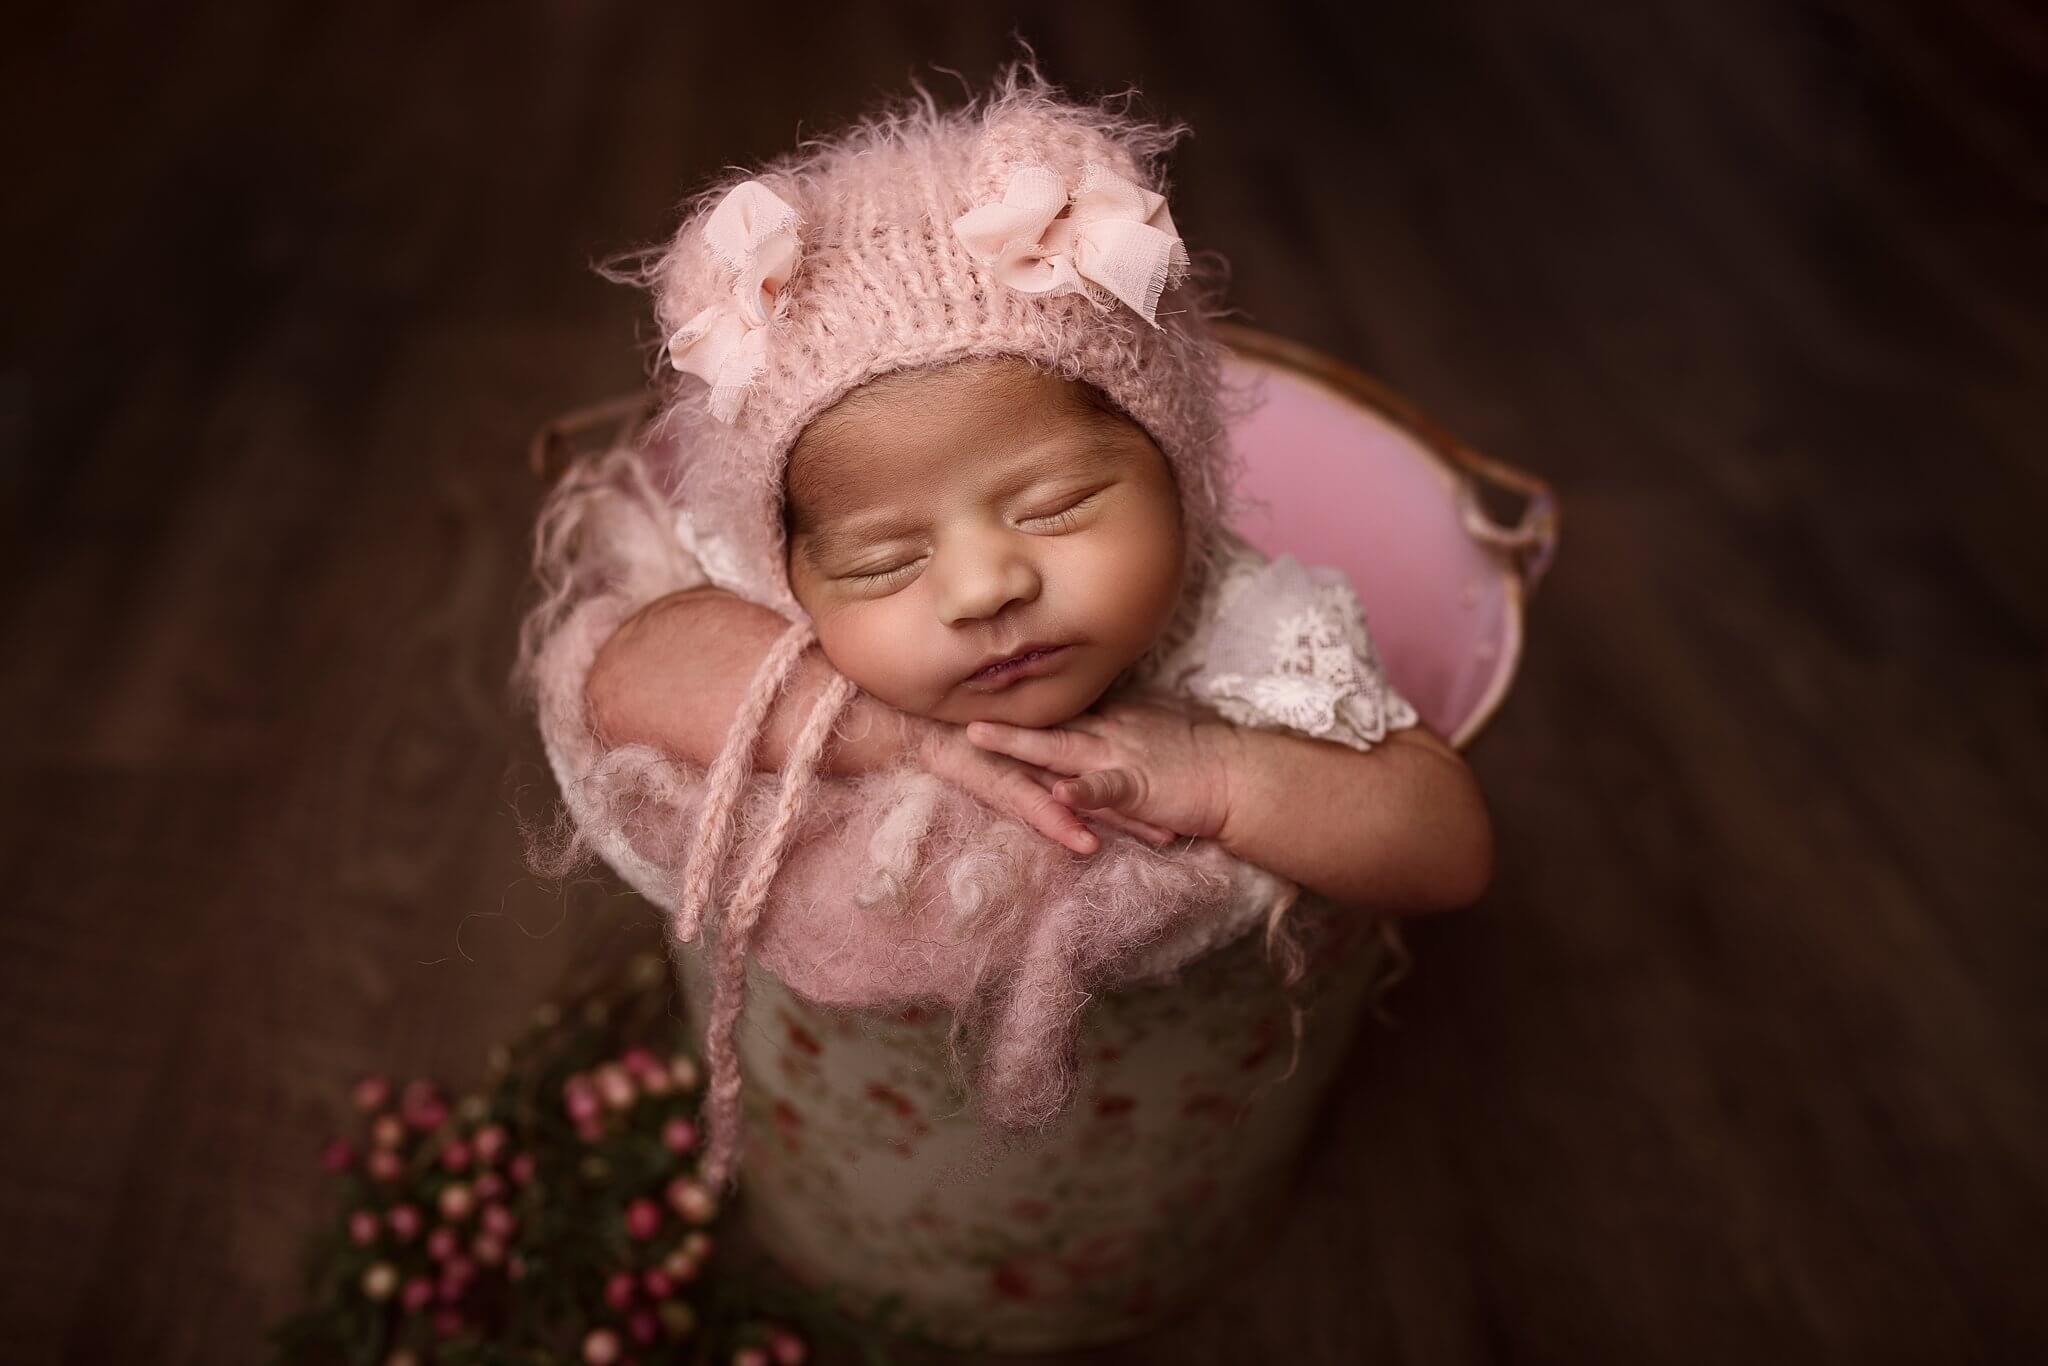 Toronto newborn photography photo of a newborn girl in a floral bucket wearing a pink teddy hat